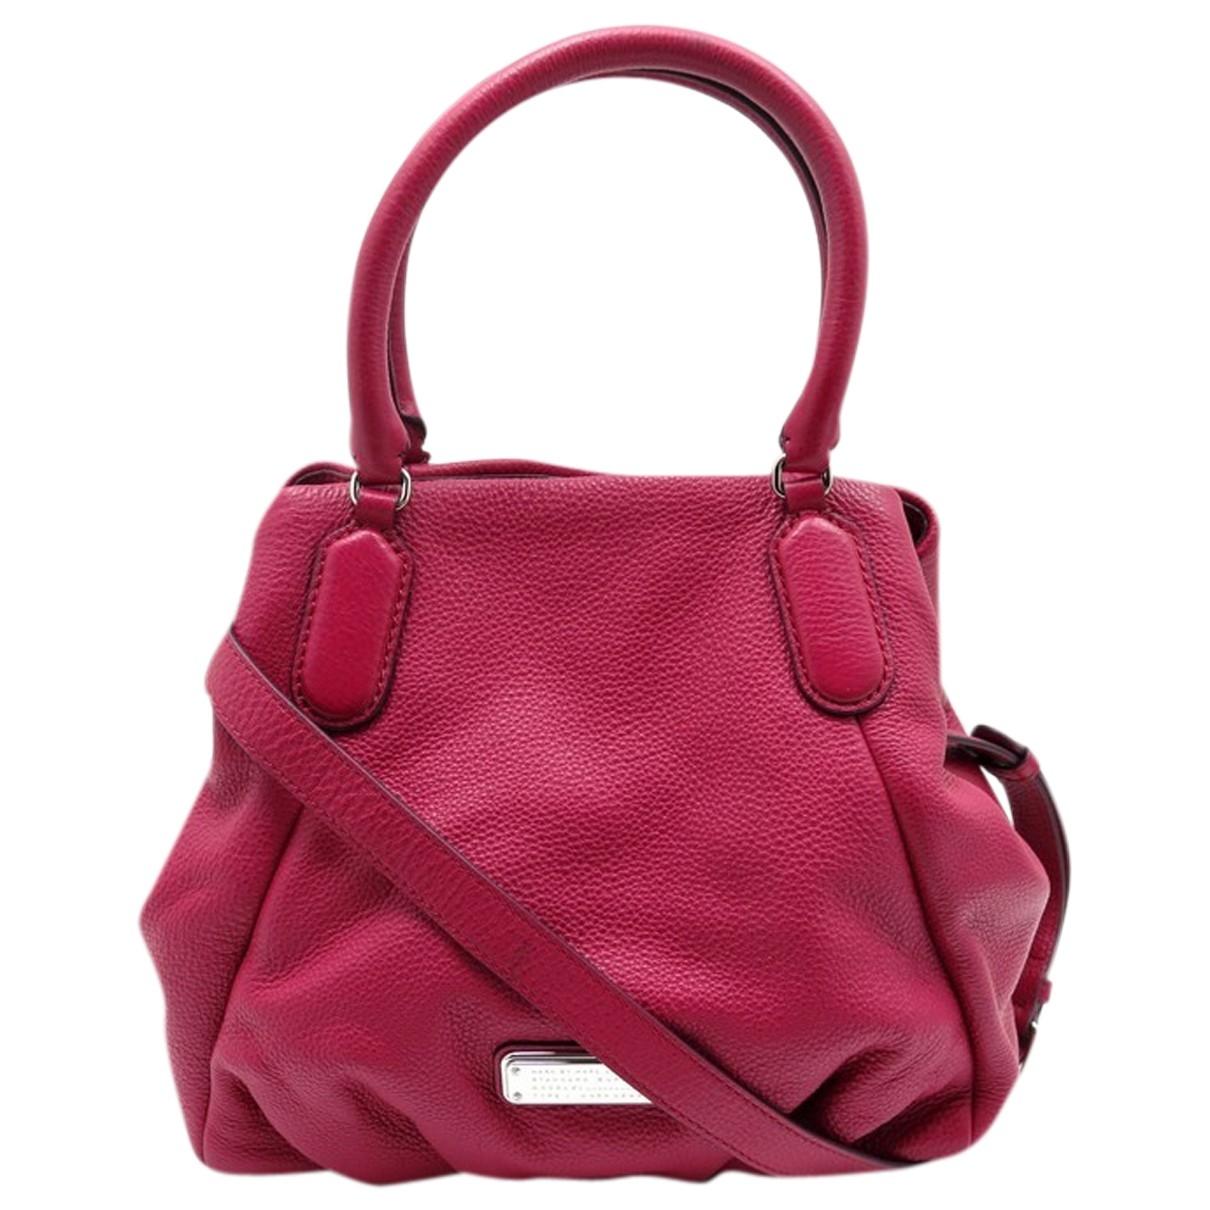 Lyst - Marc By Marc Jacobs Pink Leather Handbag in Pink